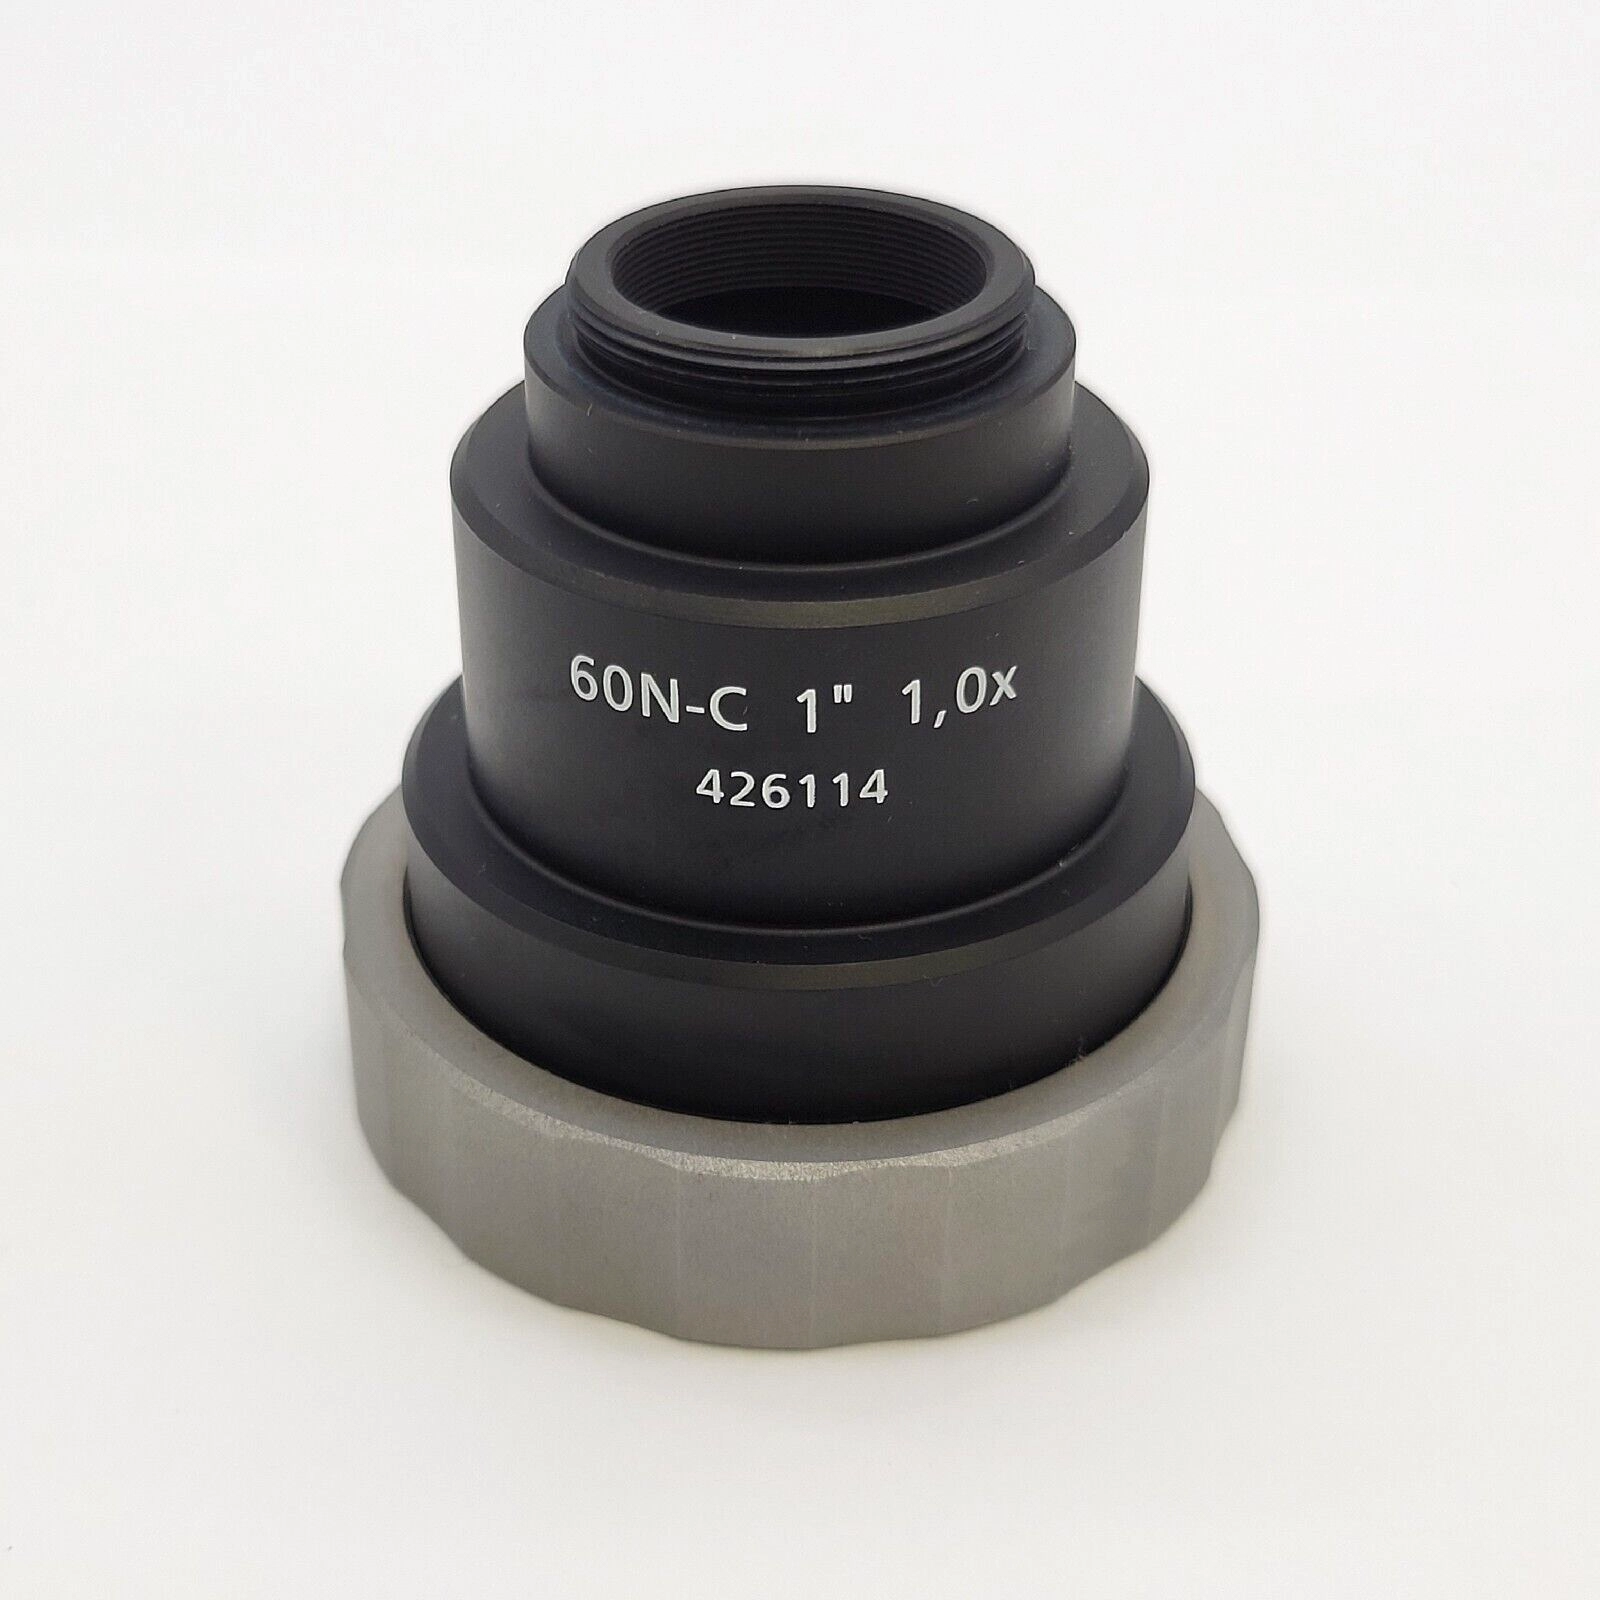 Zeiss Microscope Camera Adapter 60N-C 1" 1.0x 426114